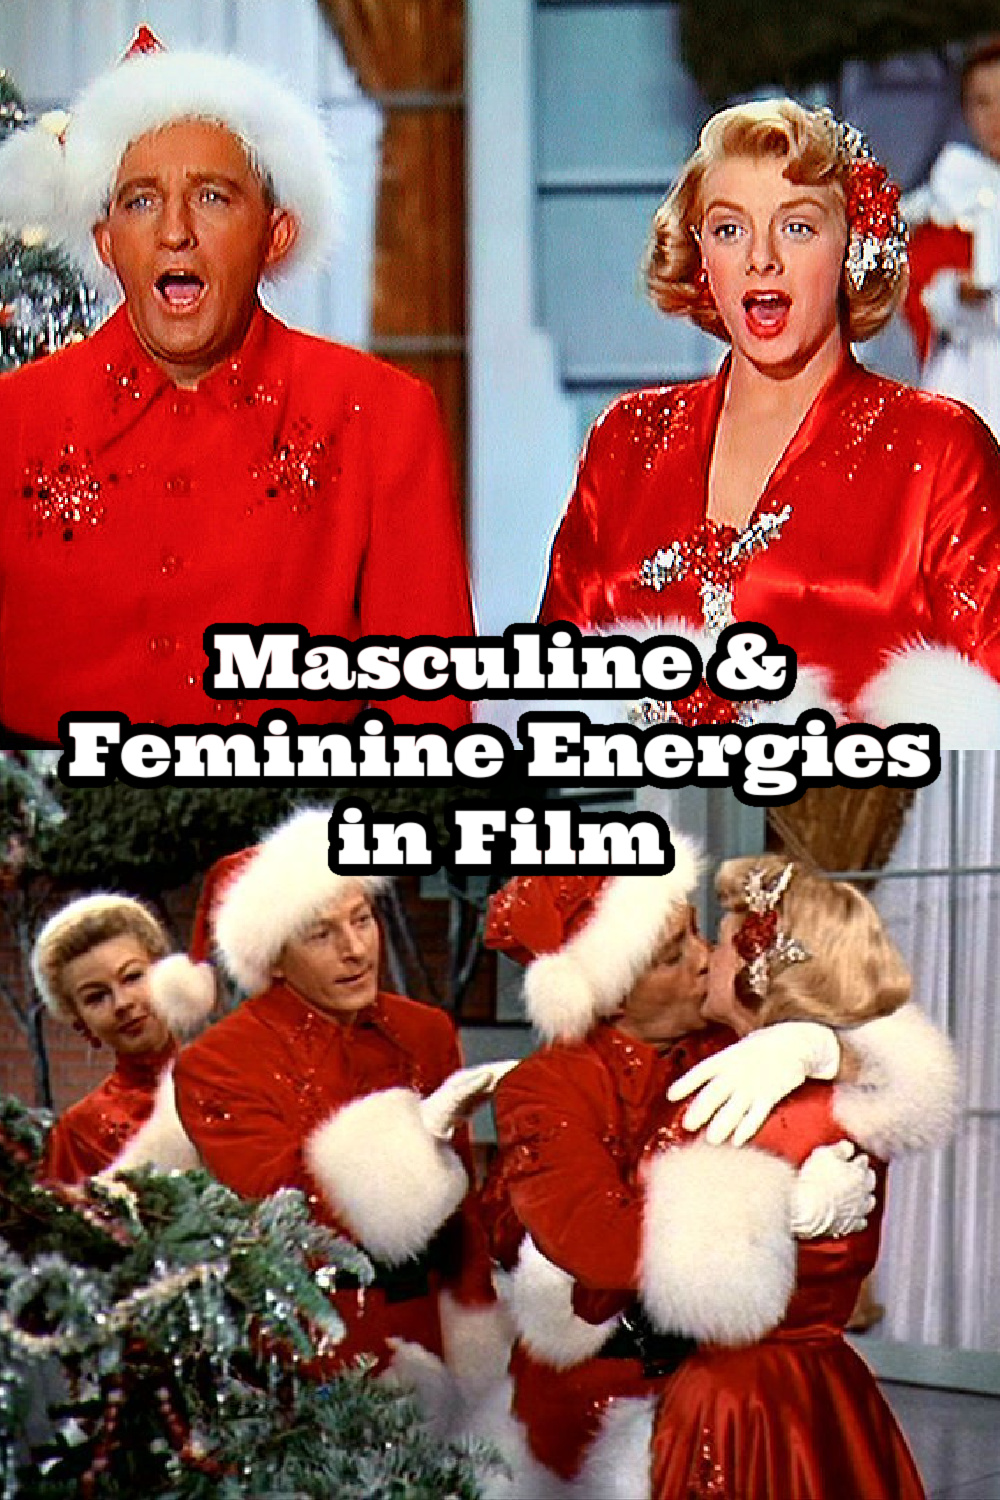 white christmas film breakdown, white christmas bing crosby rosemary clooney, understanding masculine and feminine energy, understanding masculine and feminine energy beginners guide, feminine and masculine energy in relationships, difference between feminine and masculine energy, divine masculine and feminine healing energy, feminine energy, feminine and masculine energy balance, feminine and masculine energy traits, feminine masculine energy, feminine energy vs masculine energy, masculine energy, masculine energy vs feminine energy, masculine vs feminine, Everyday starlet, sarah blodgett,